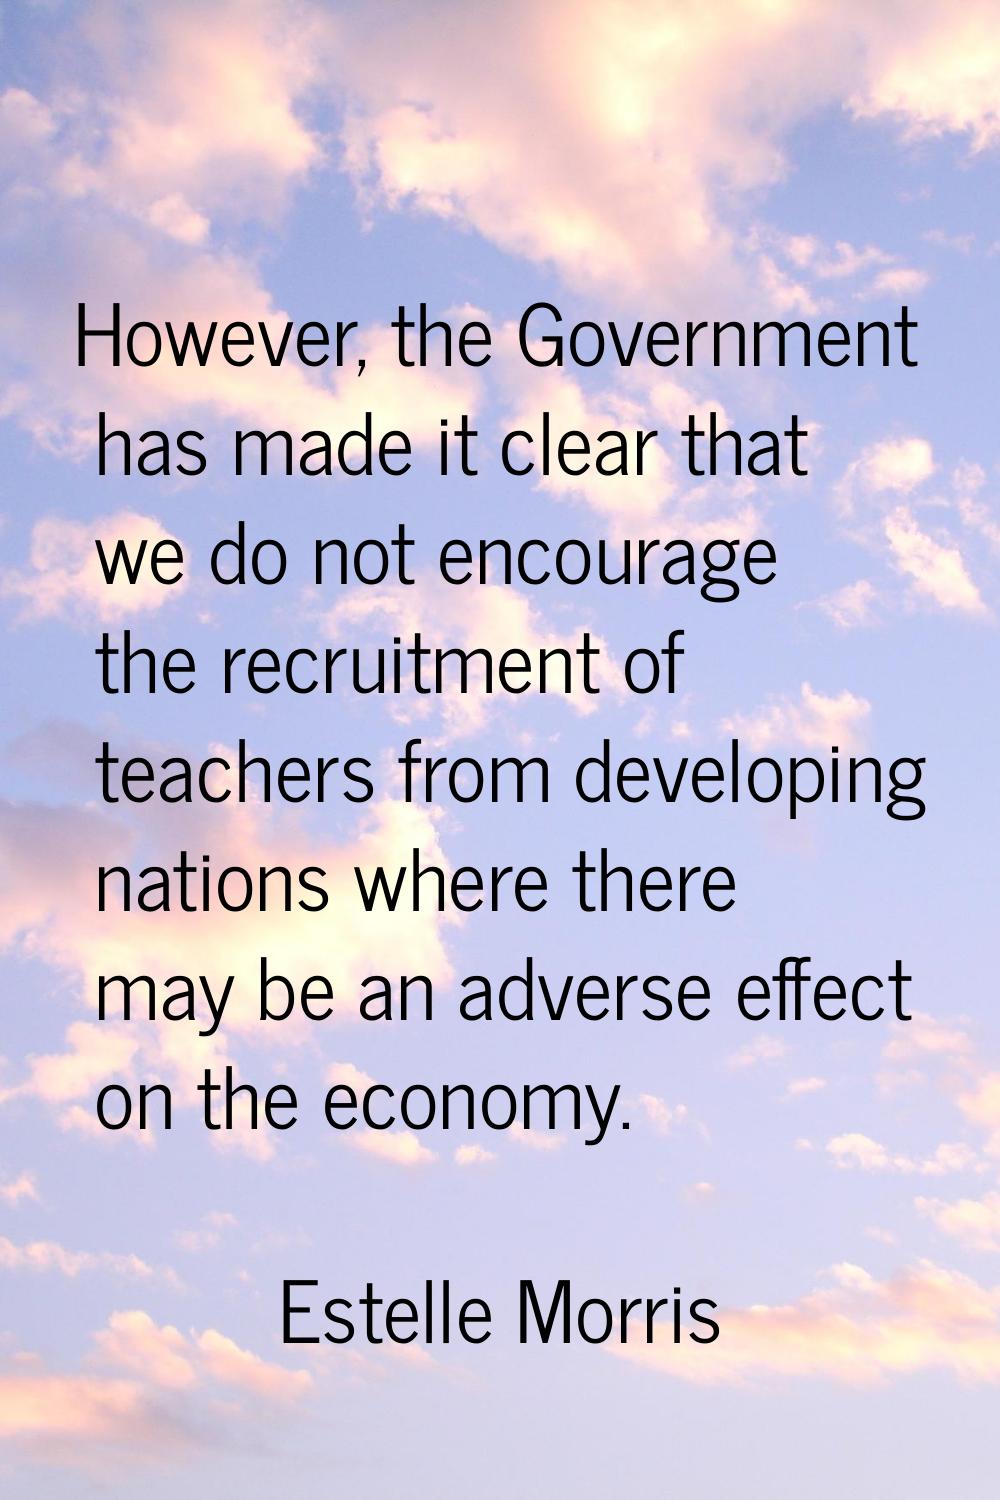 However, the Government has made it clear that we do not encourage the recruitment of teachers from